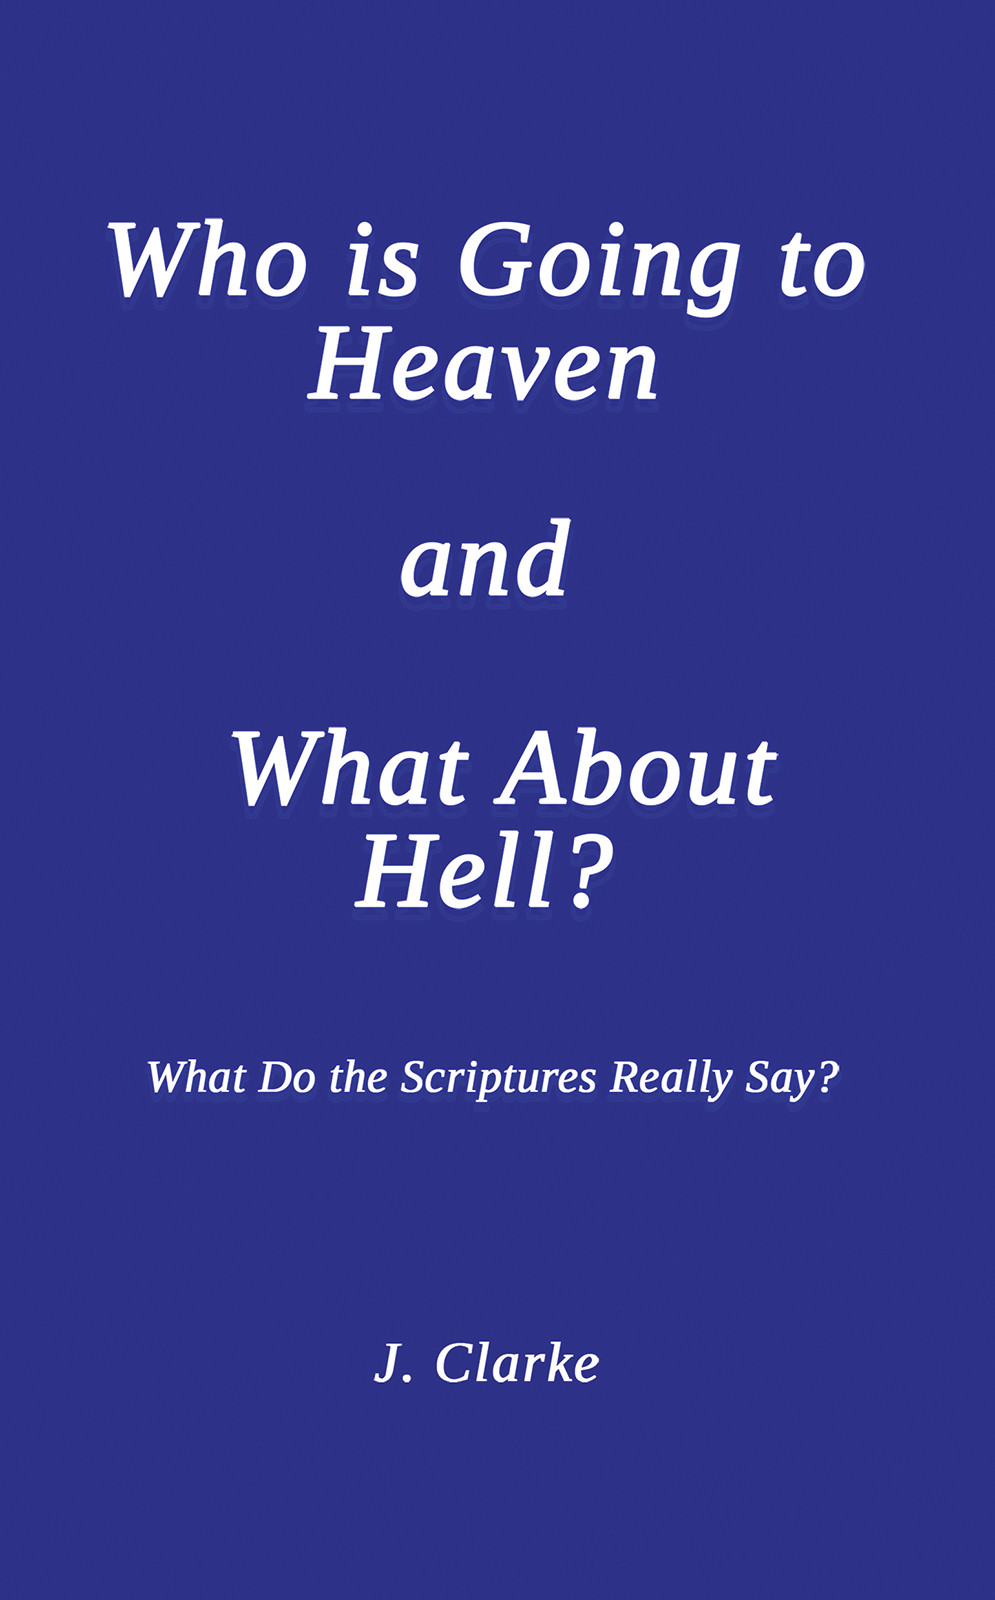 Who is Going to Heaven and What About Hell?